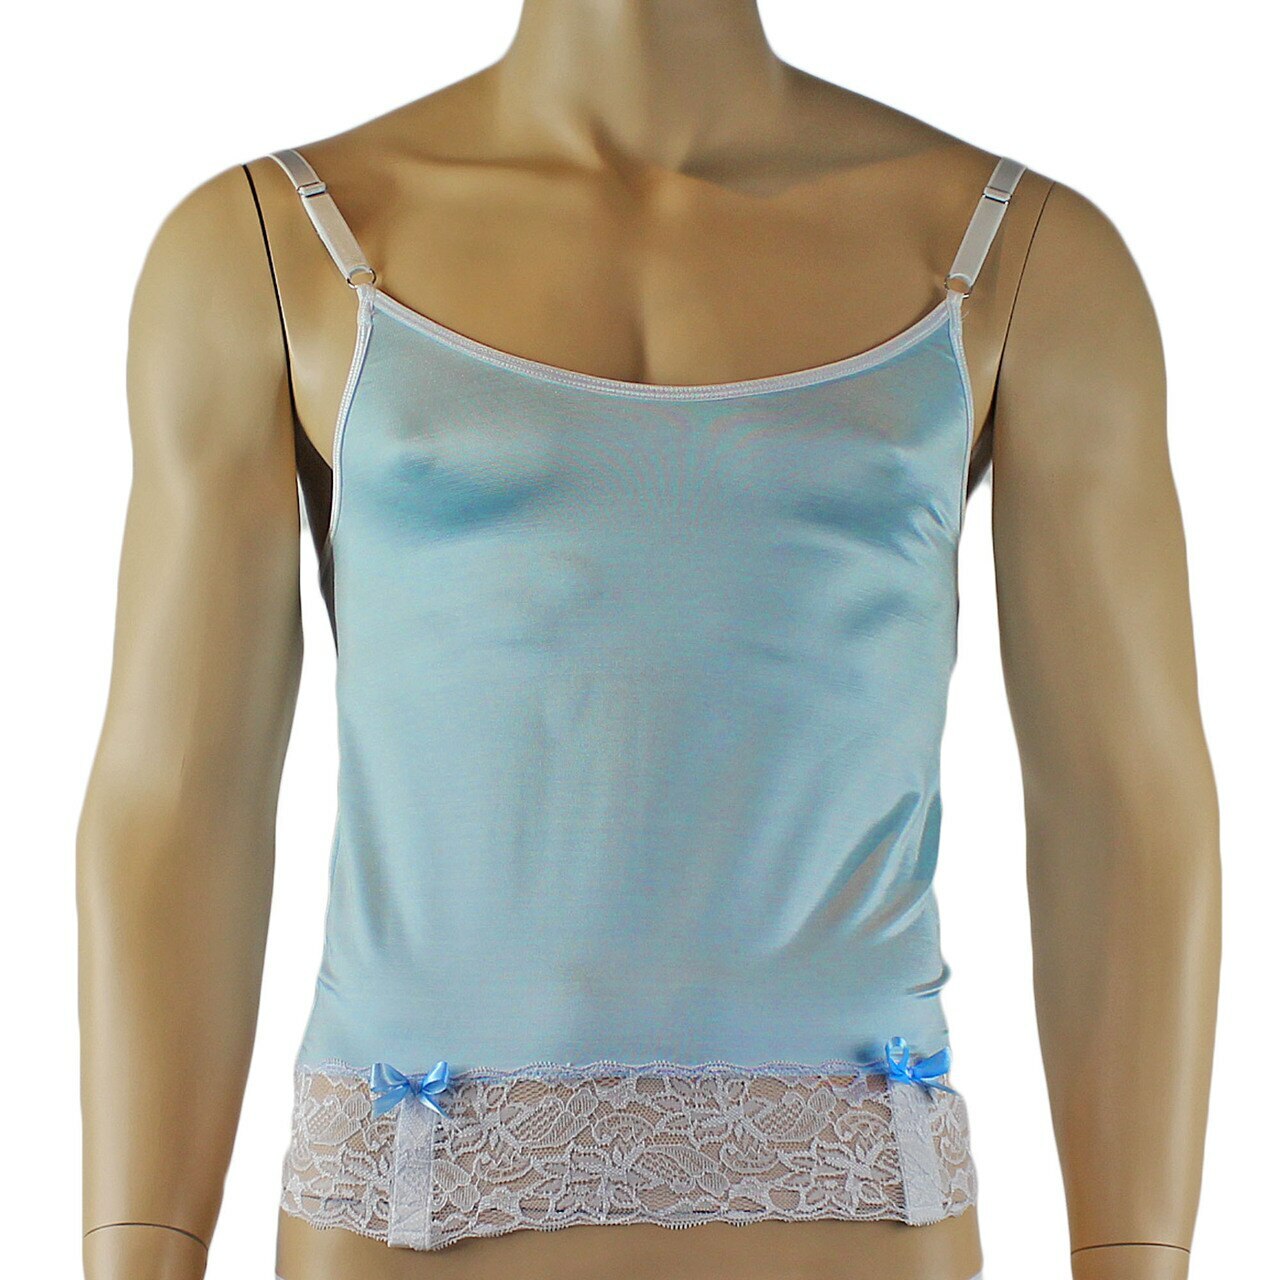 Mens Joanne Camisole Bustier Garter Top with Pouch G string - Sizes up to 3XL Light Blue and White Lace